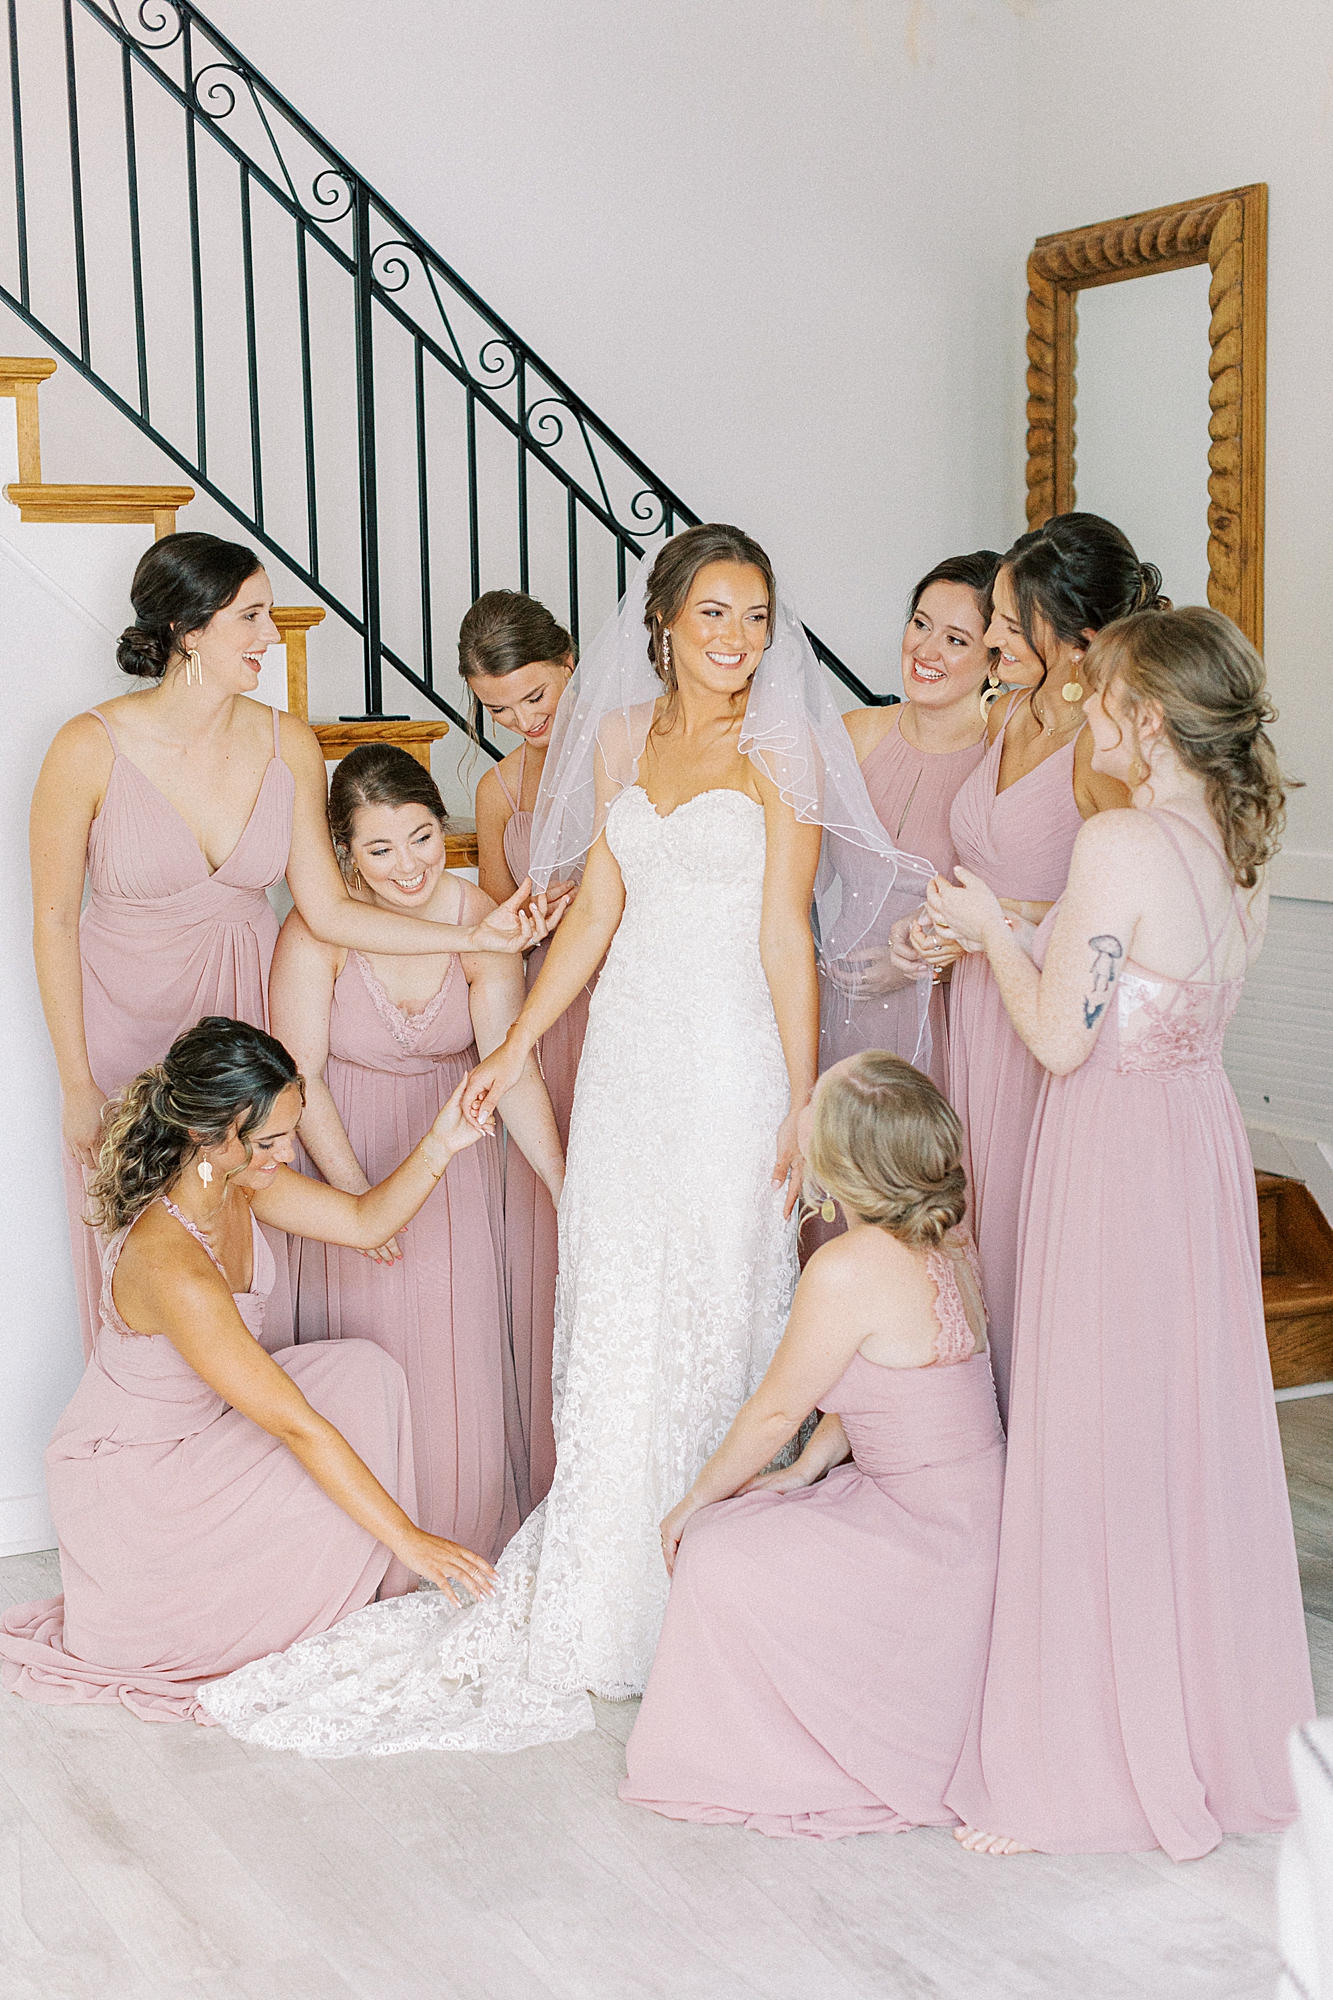 Bridesmaids helping bride with final touches before getting ready for ceremony at Richmond wedding venue, Alturia farm.